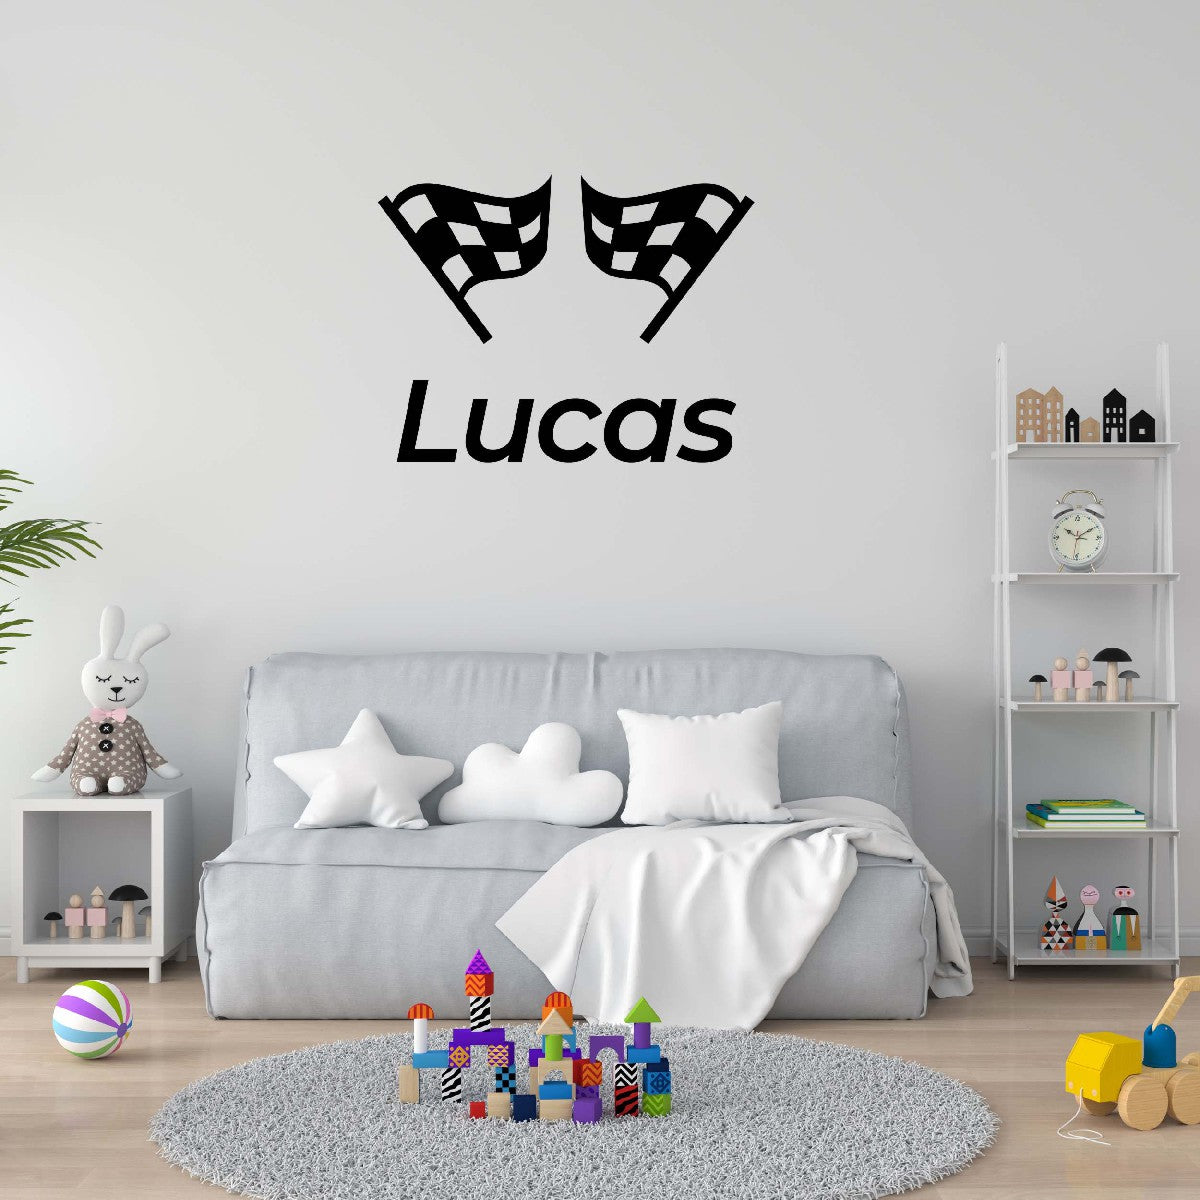 Personalized Name Stickers with Start Finish Flags - Easily-Applied Name Decals for Walls Furniture Laptop - Stunning Custom Name Stickers for Kids Bedroom